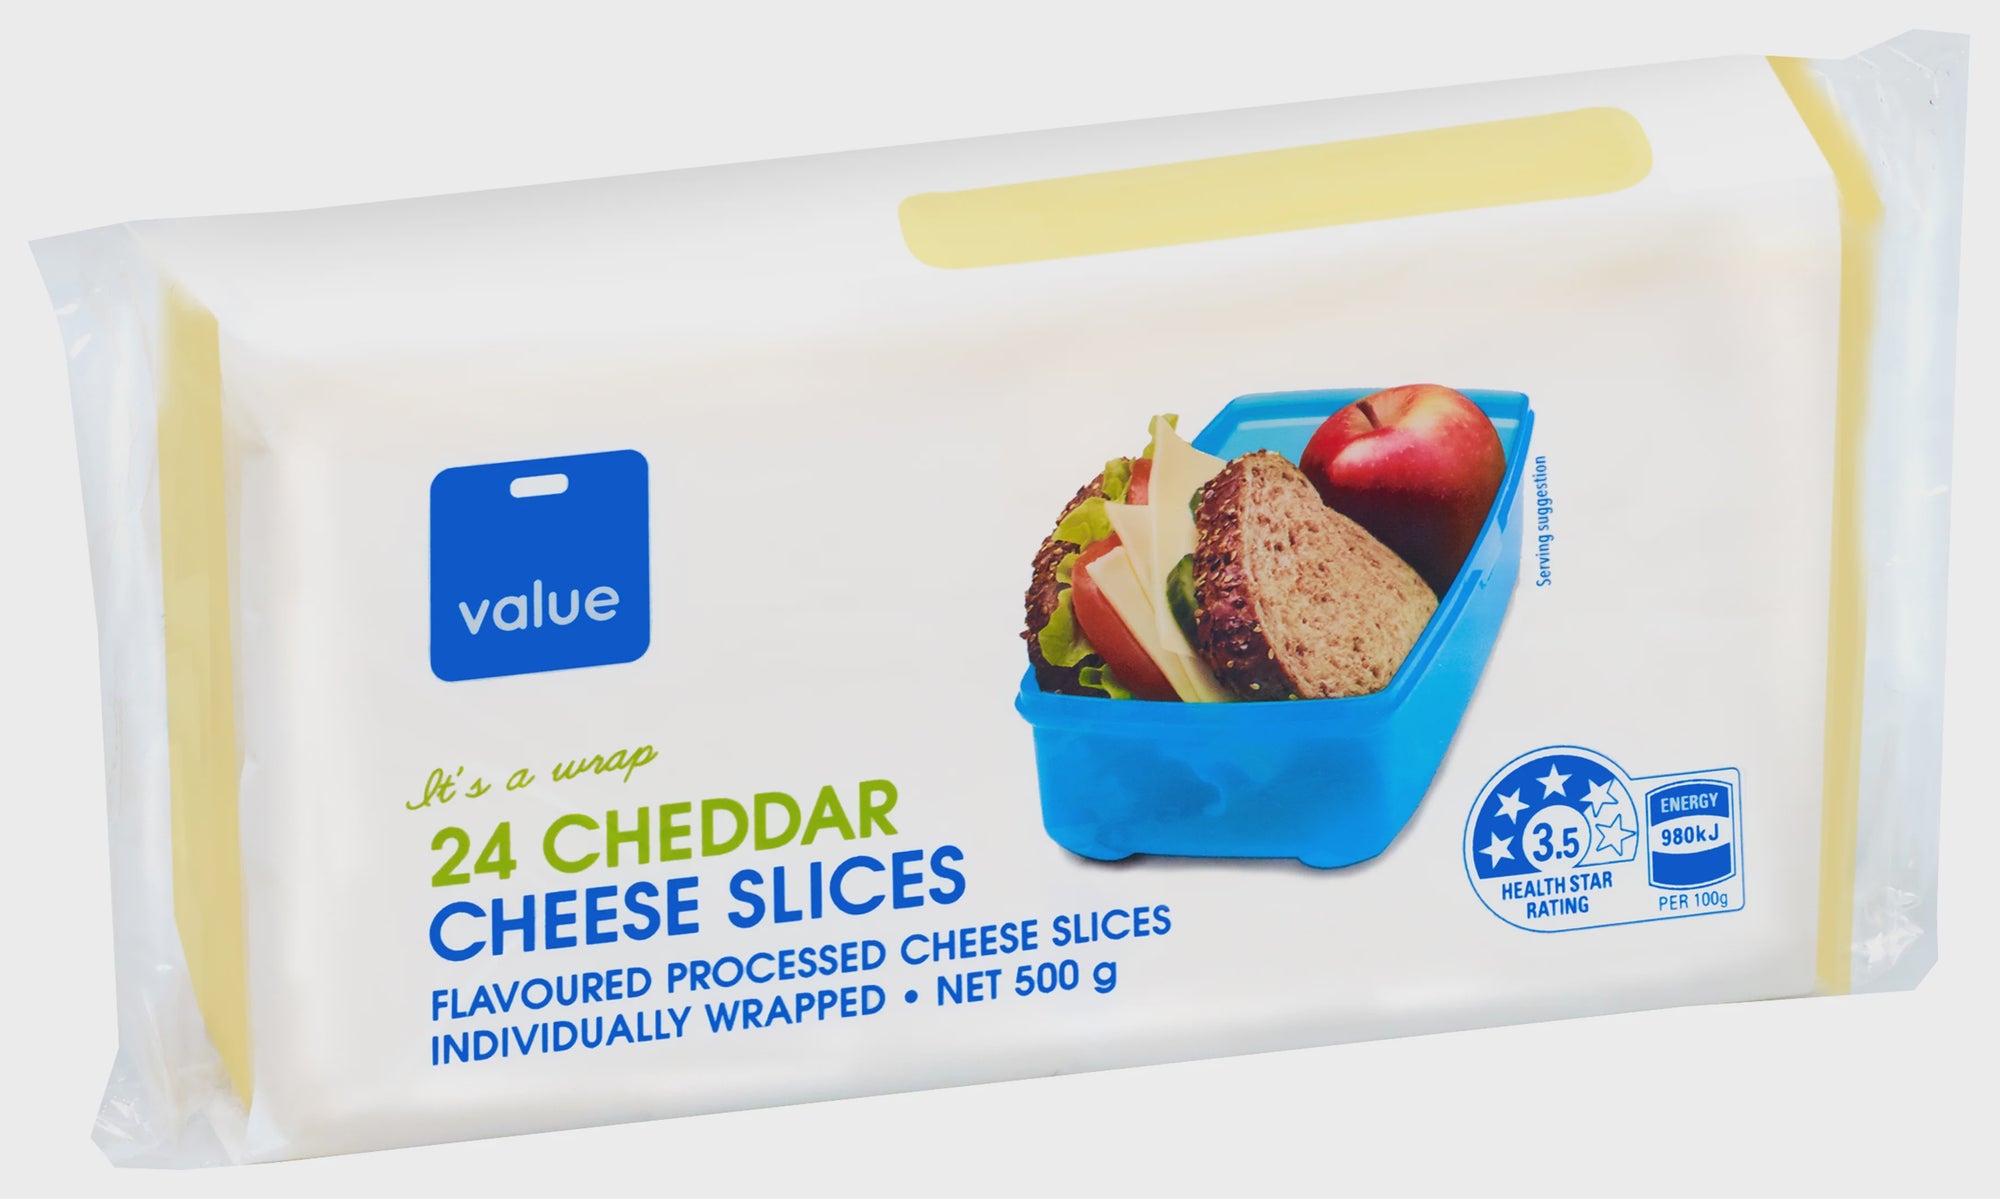 Value Cheddar Flavoured Processed Cheese Slices 500g